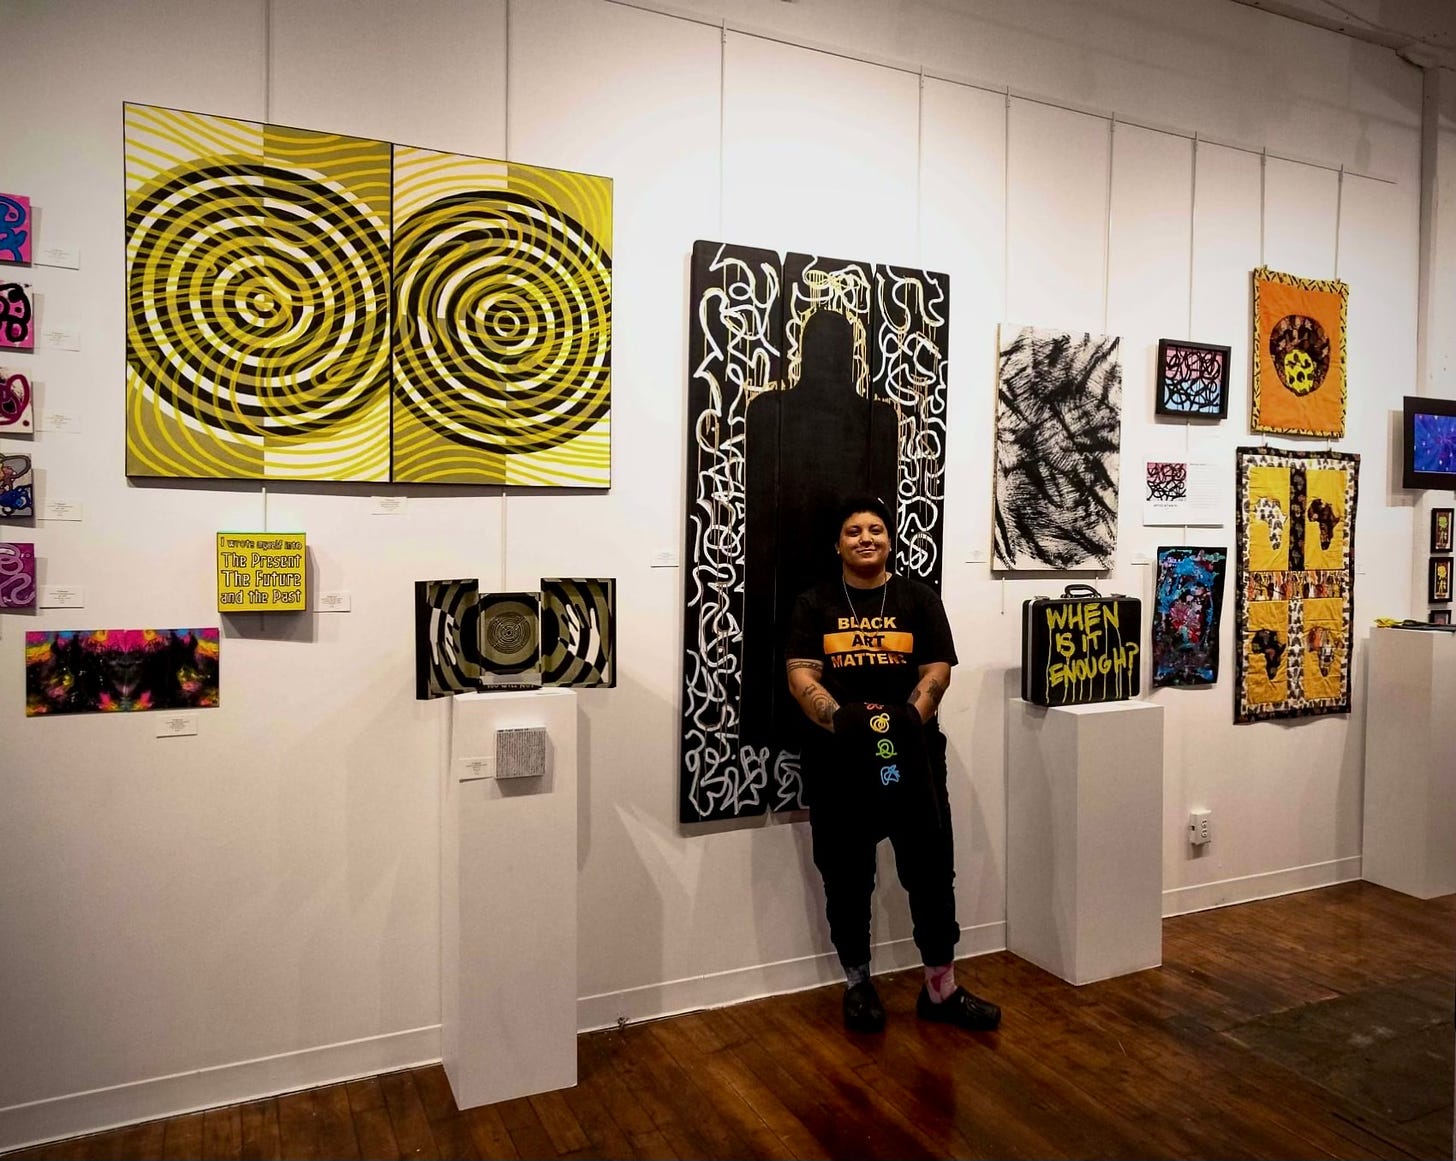 Blackfuturism Curator TJ Mundy standing in front of their work at the show.